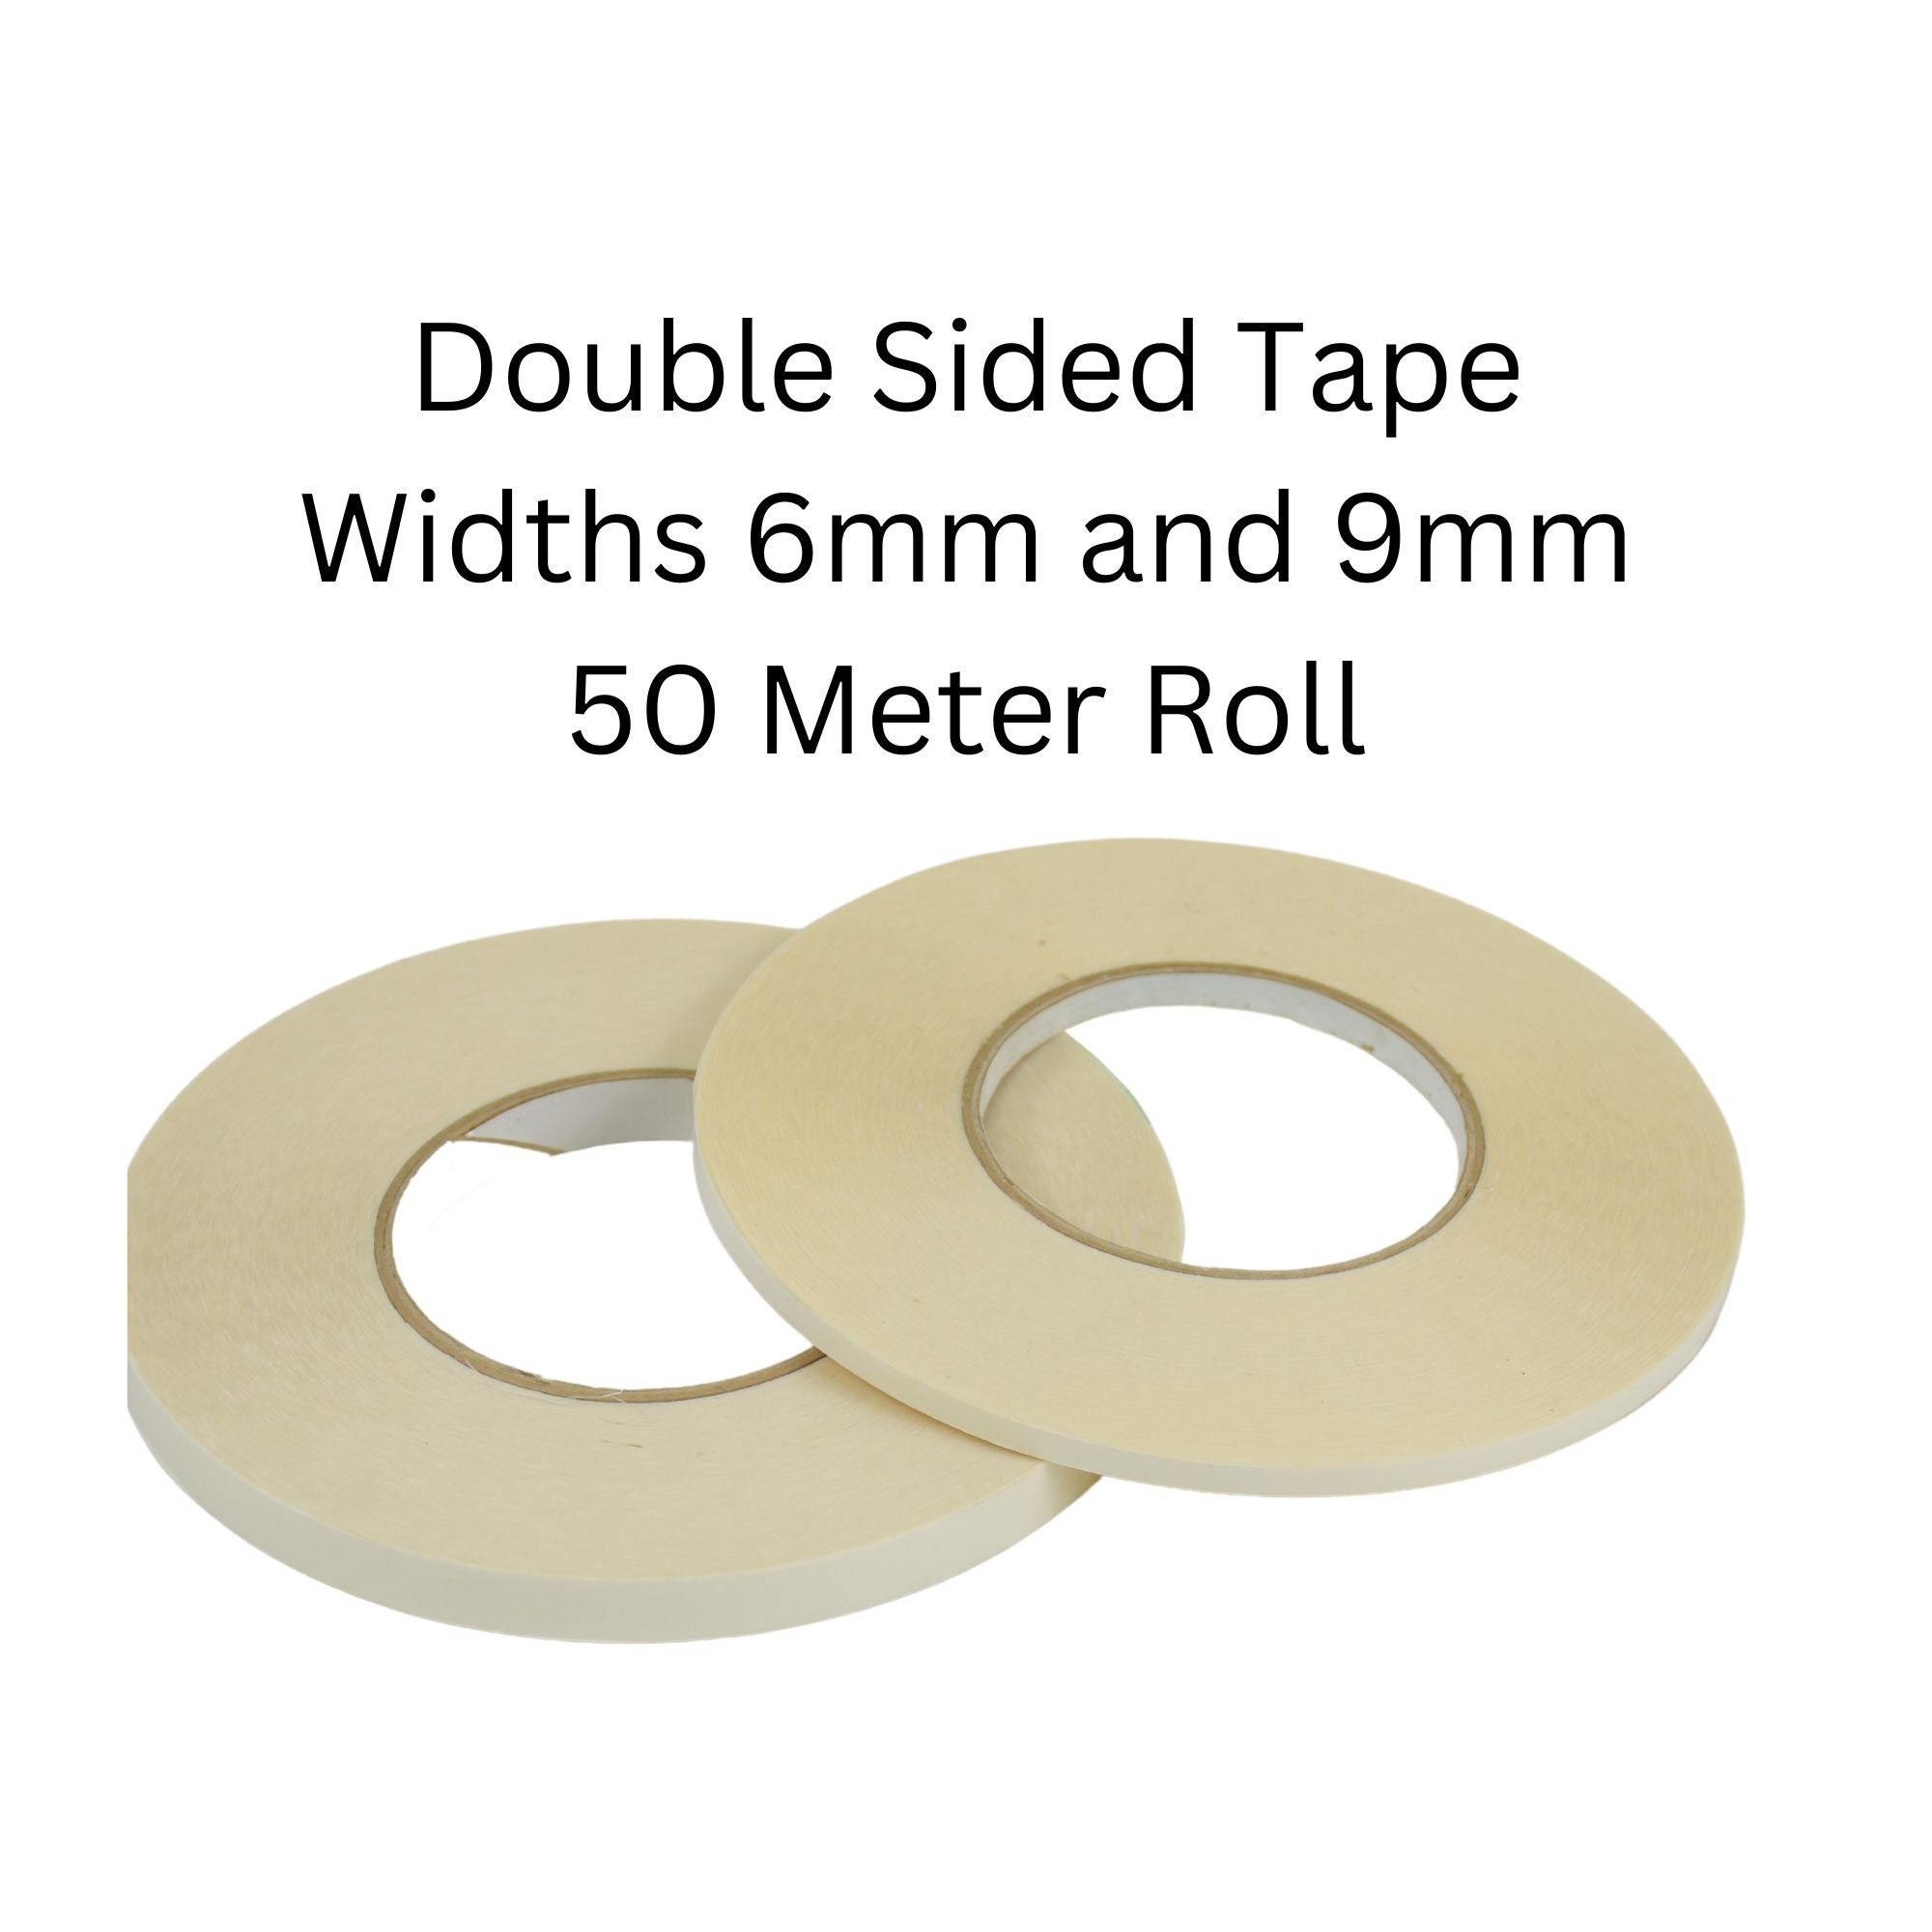 Easy Lift Double Sided Tape Choose From 2 Sizes 33 Meters per Reel 